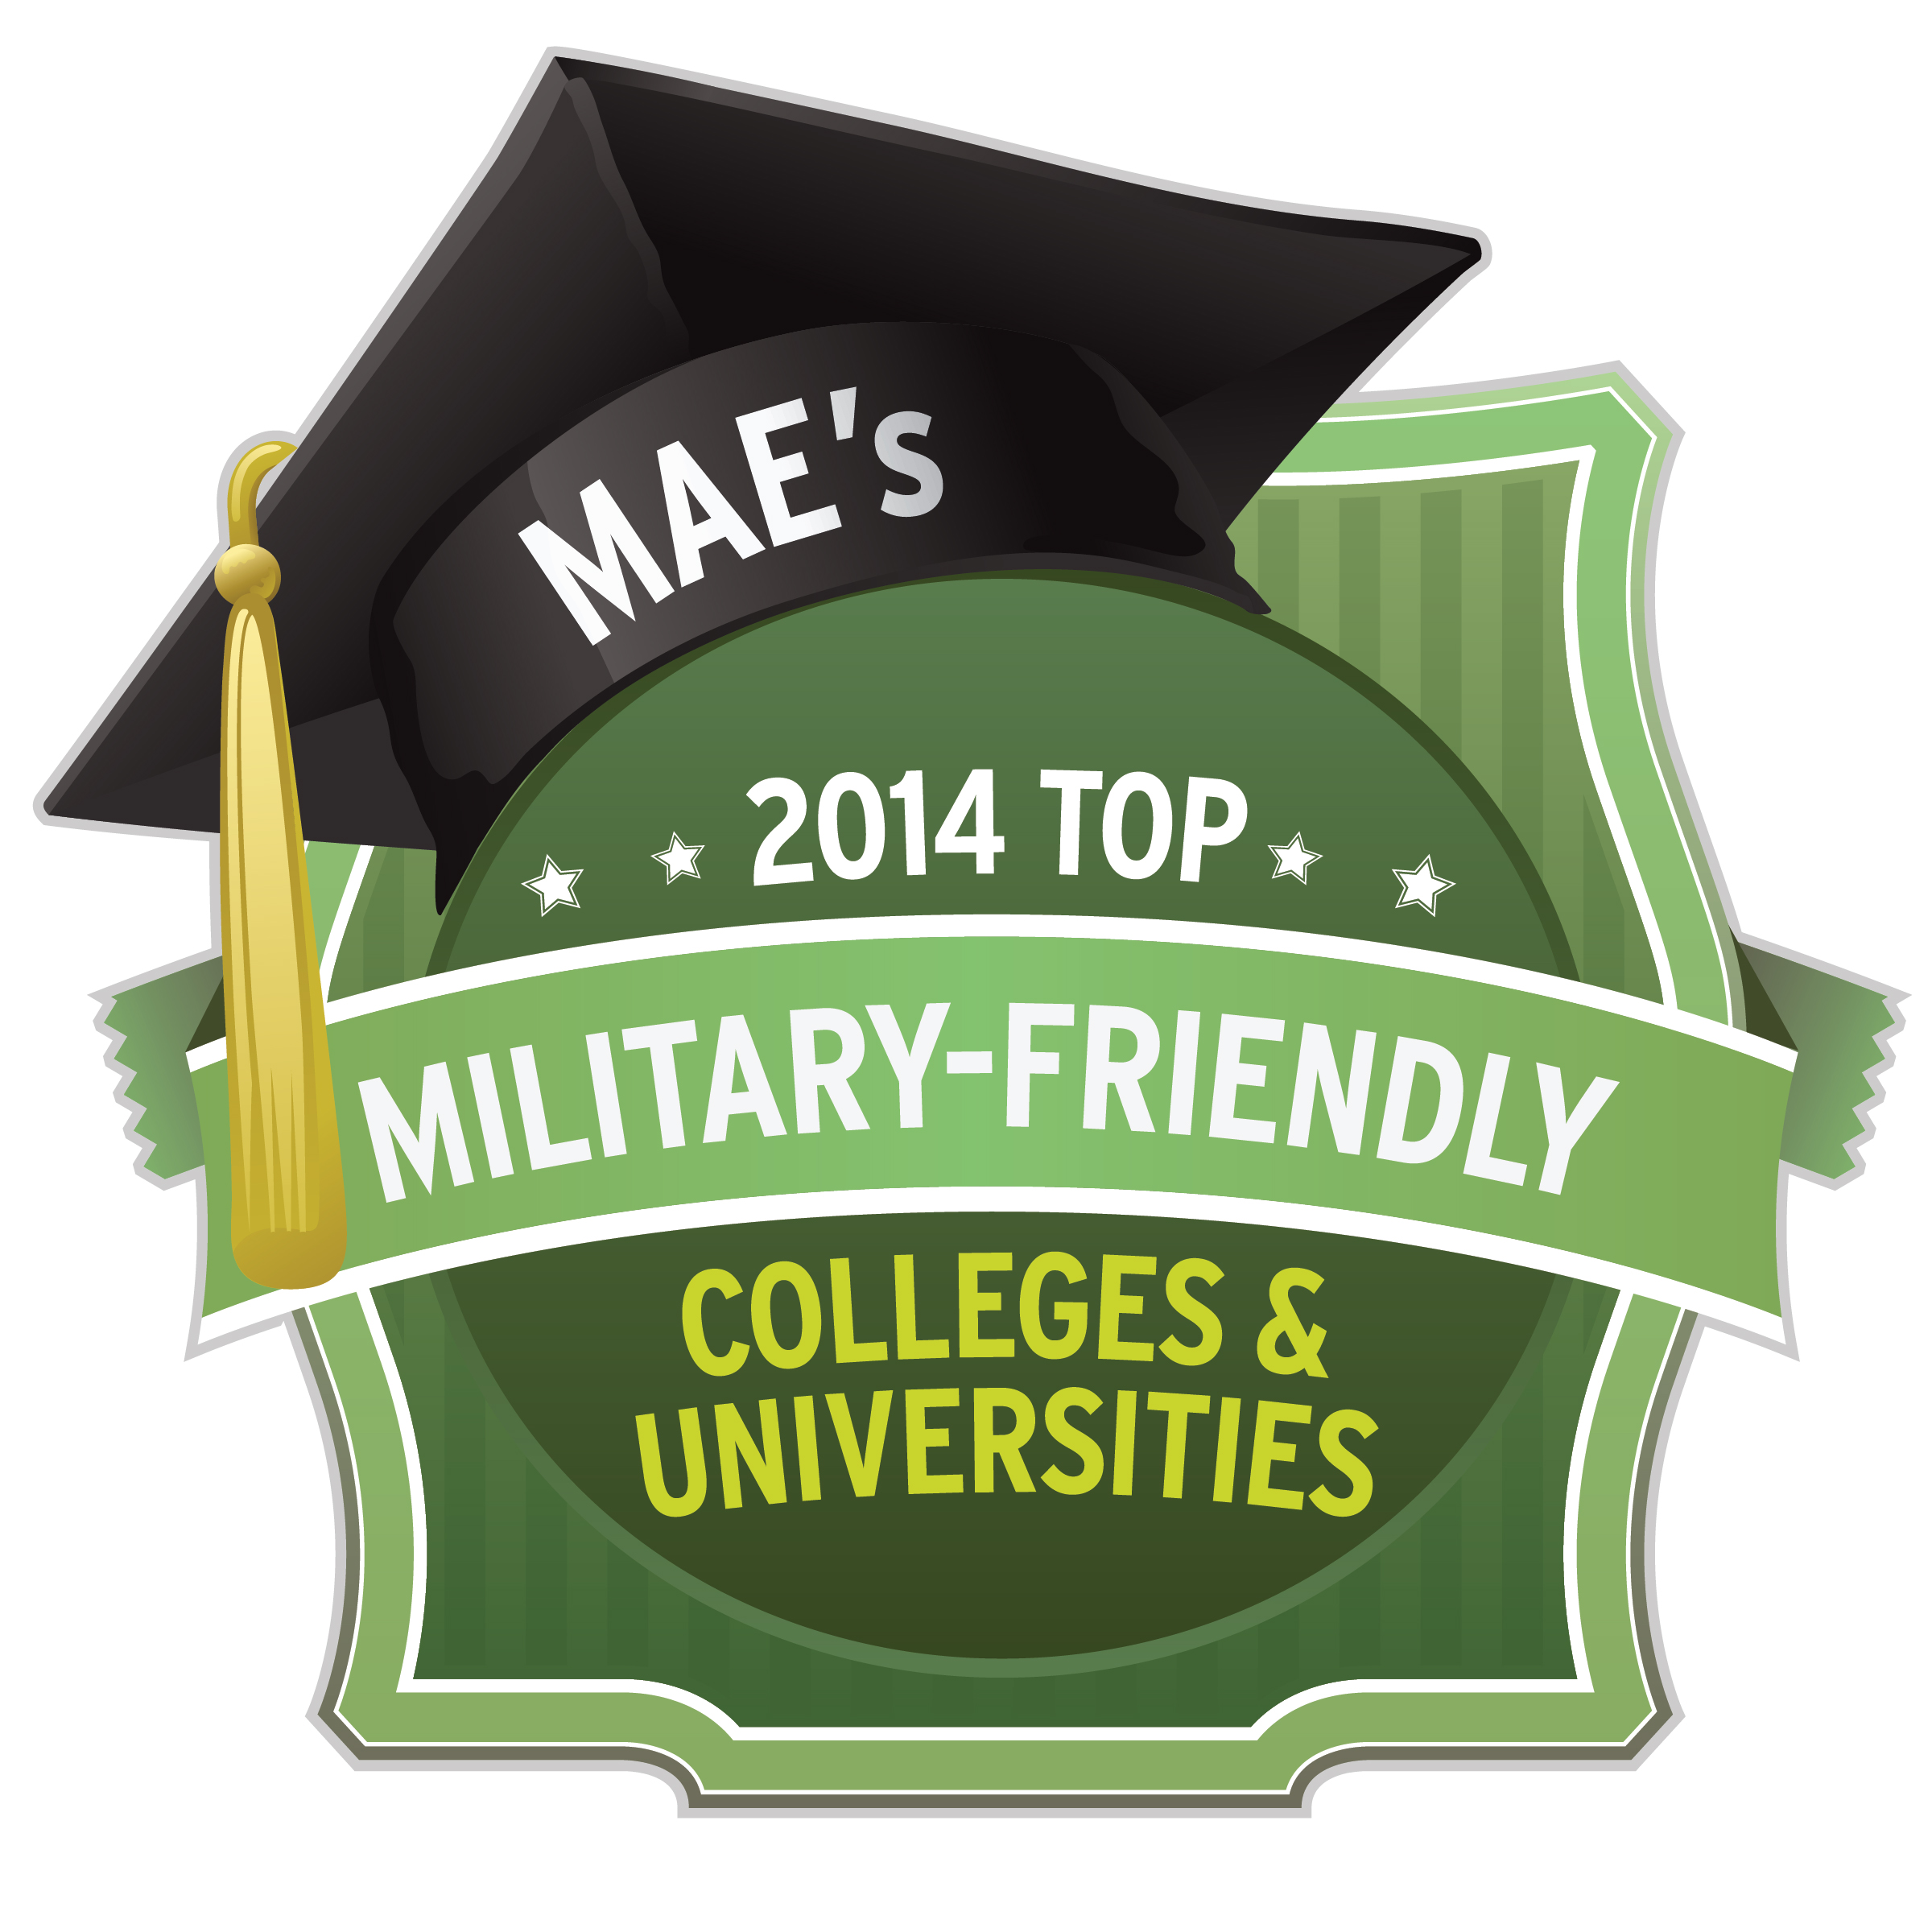 minnesota-school-of-business-honored-as-a-2014-top-military-friendly